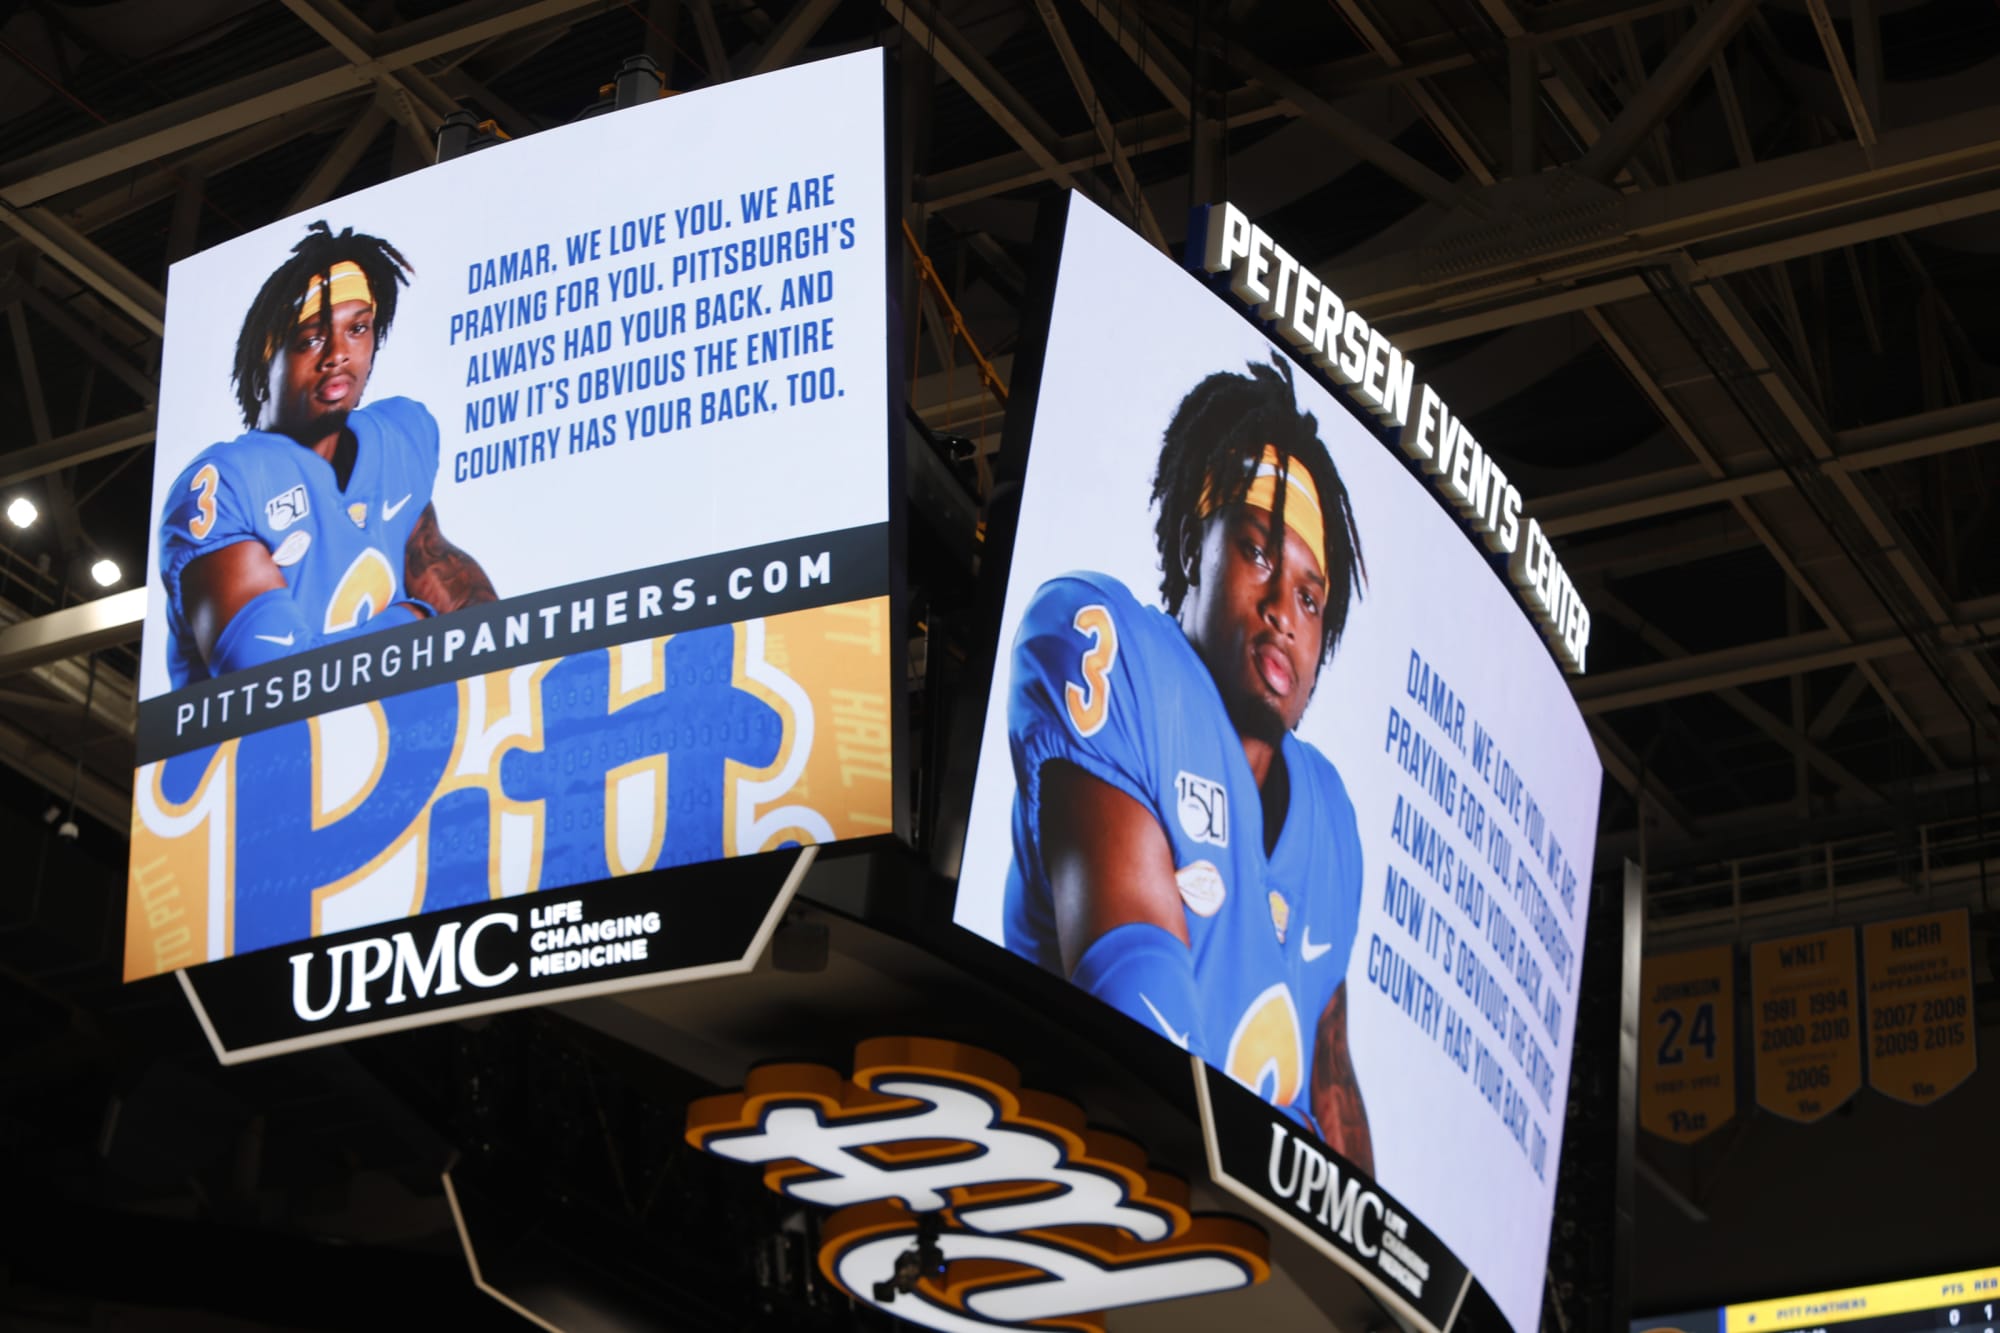 Pitt basketball upsets Virginia by 3, Damar Hamlin’s number, after paying tribute to Bills DB